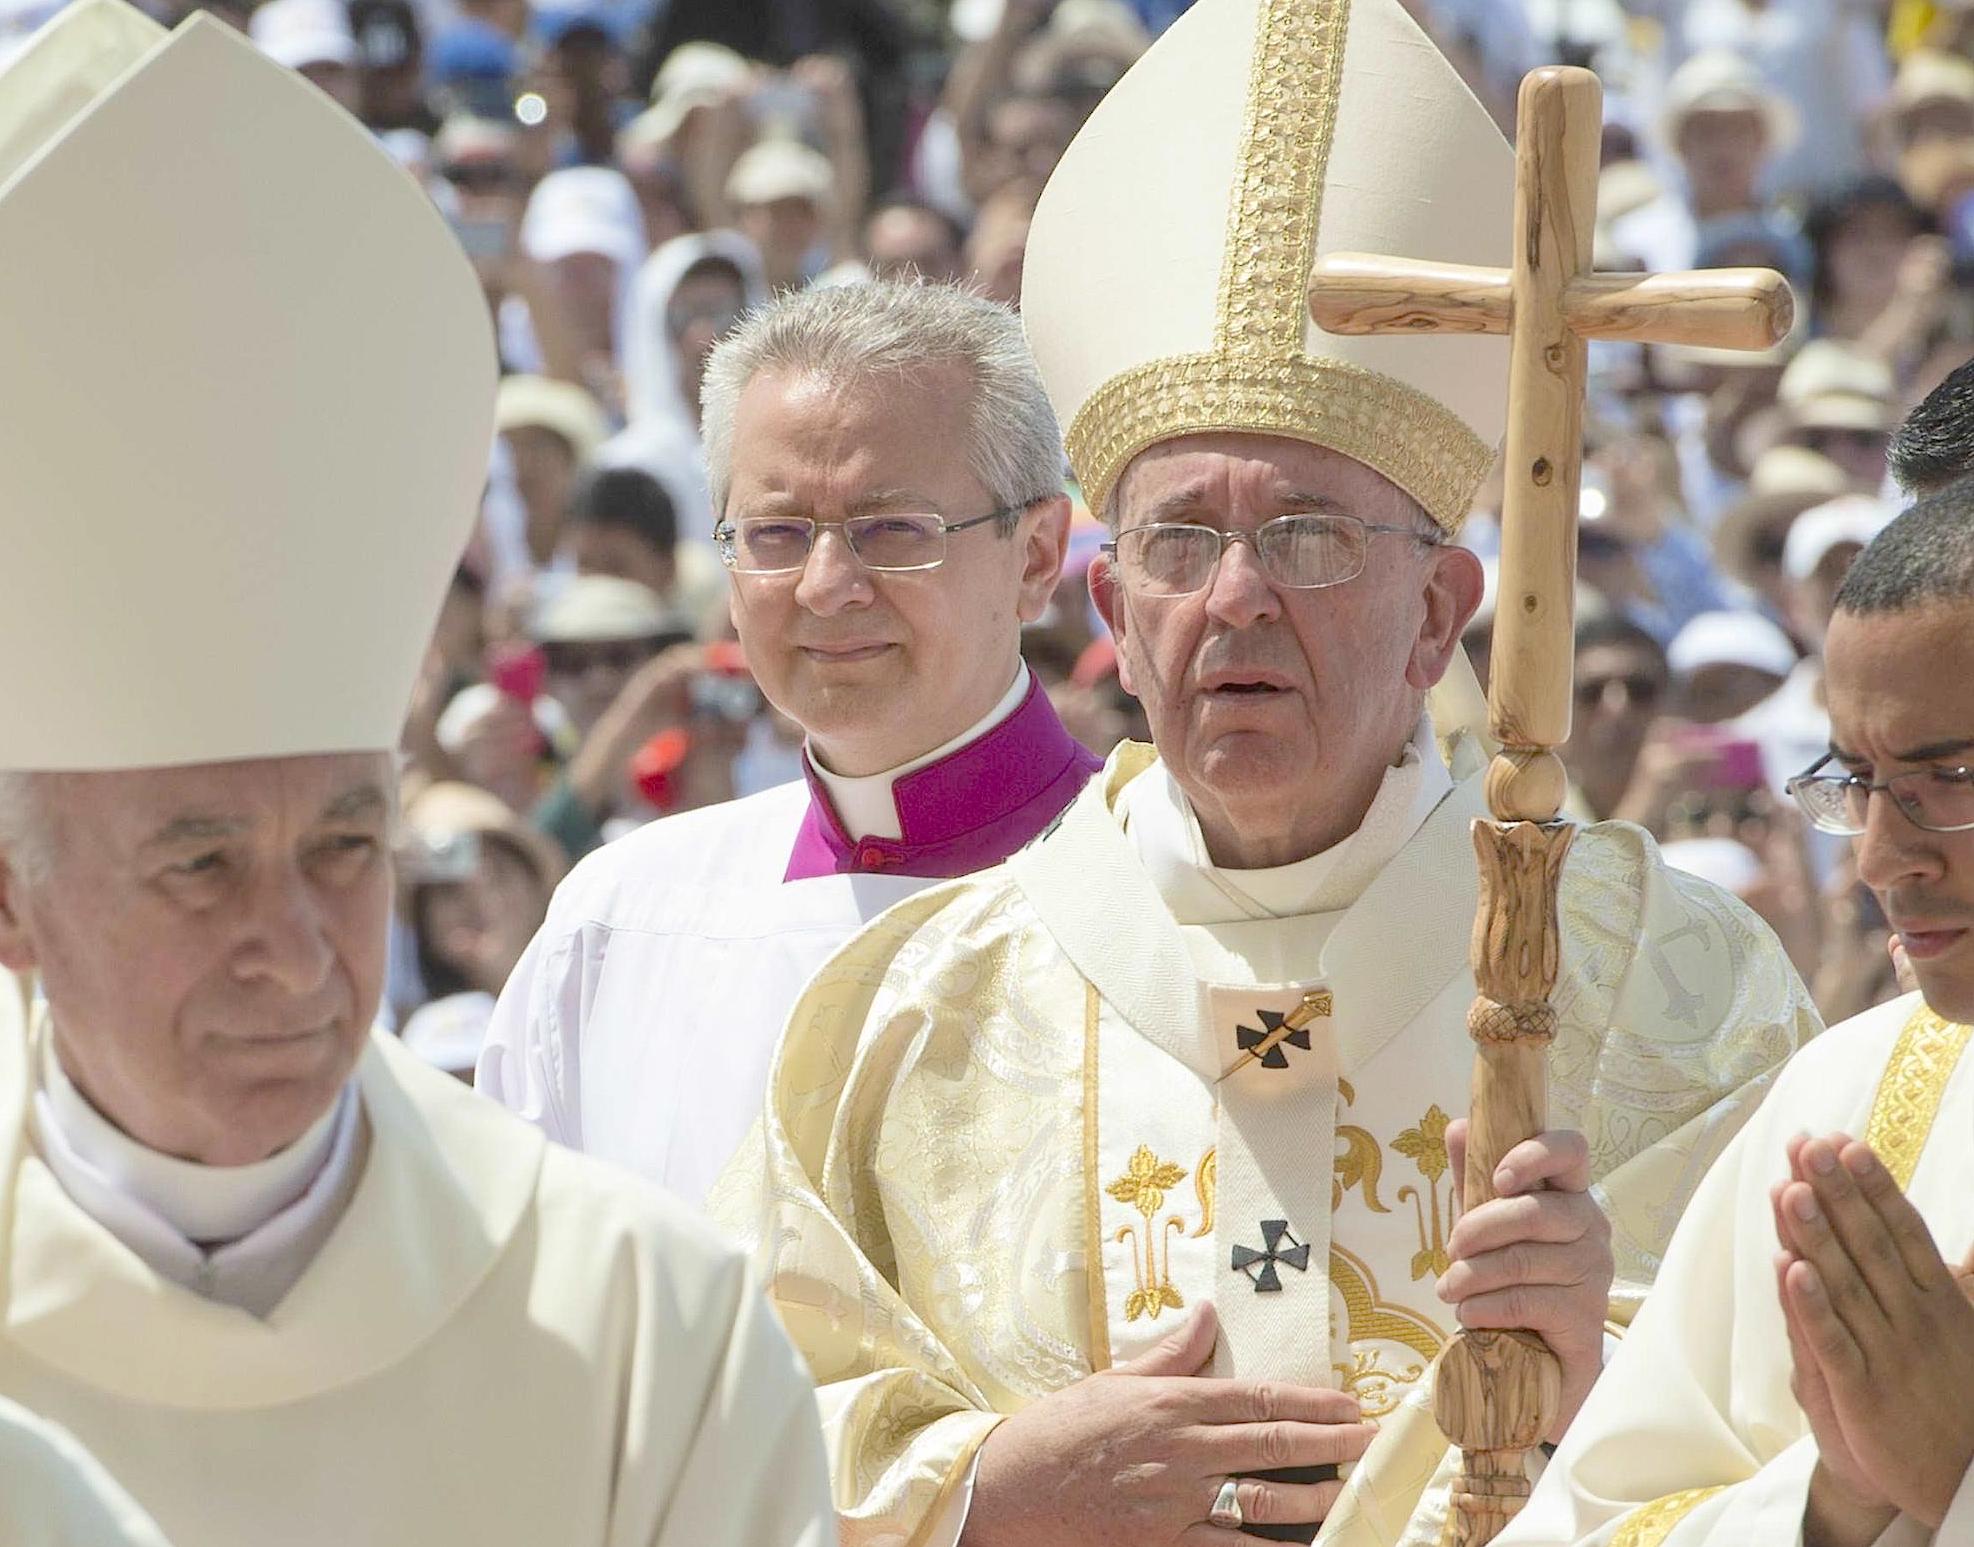 Pope Francis with wooden crozier